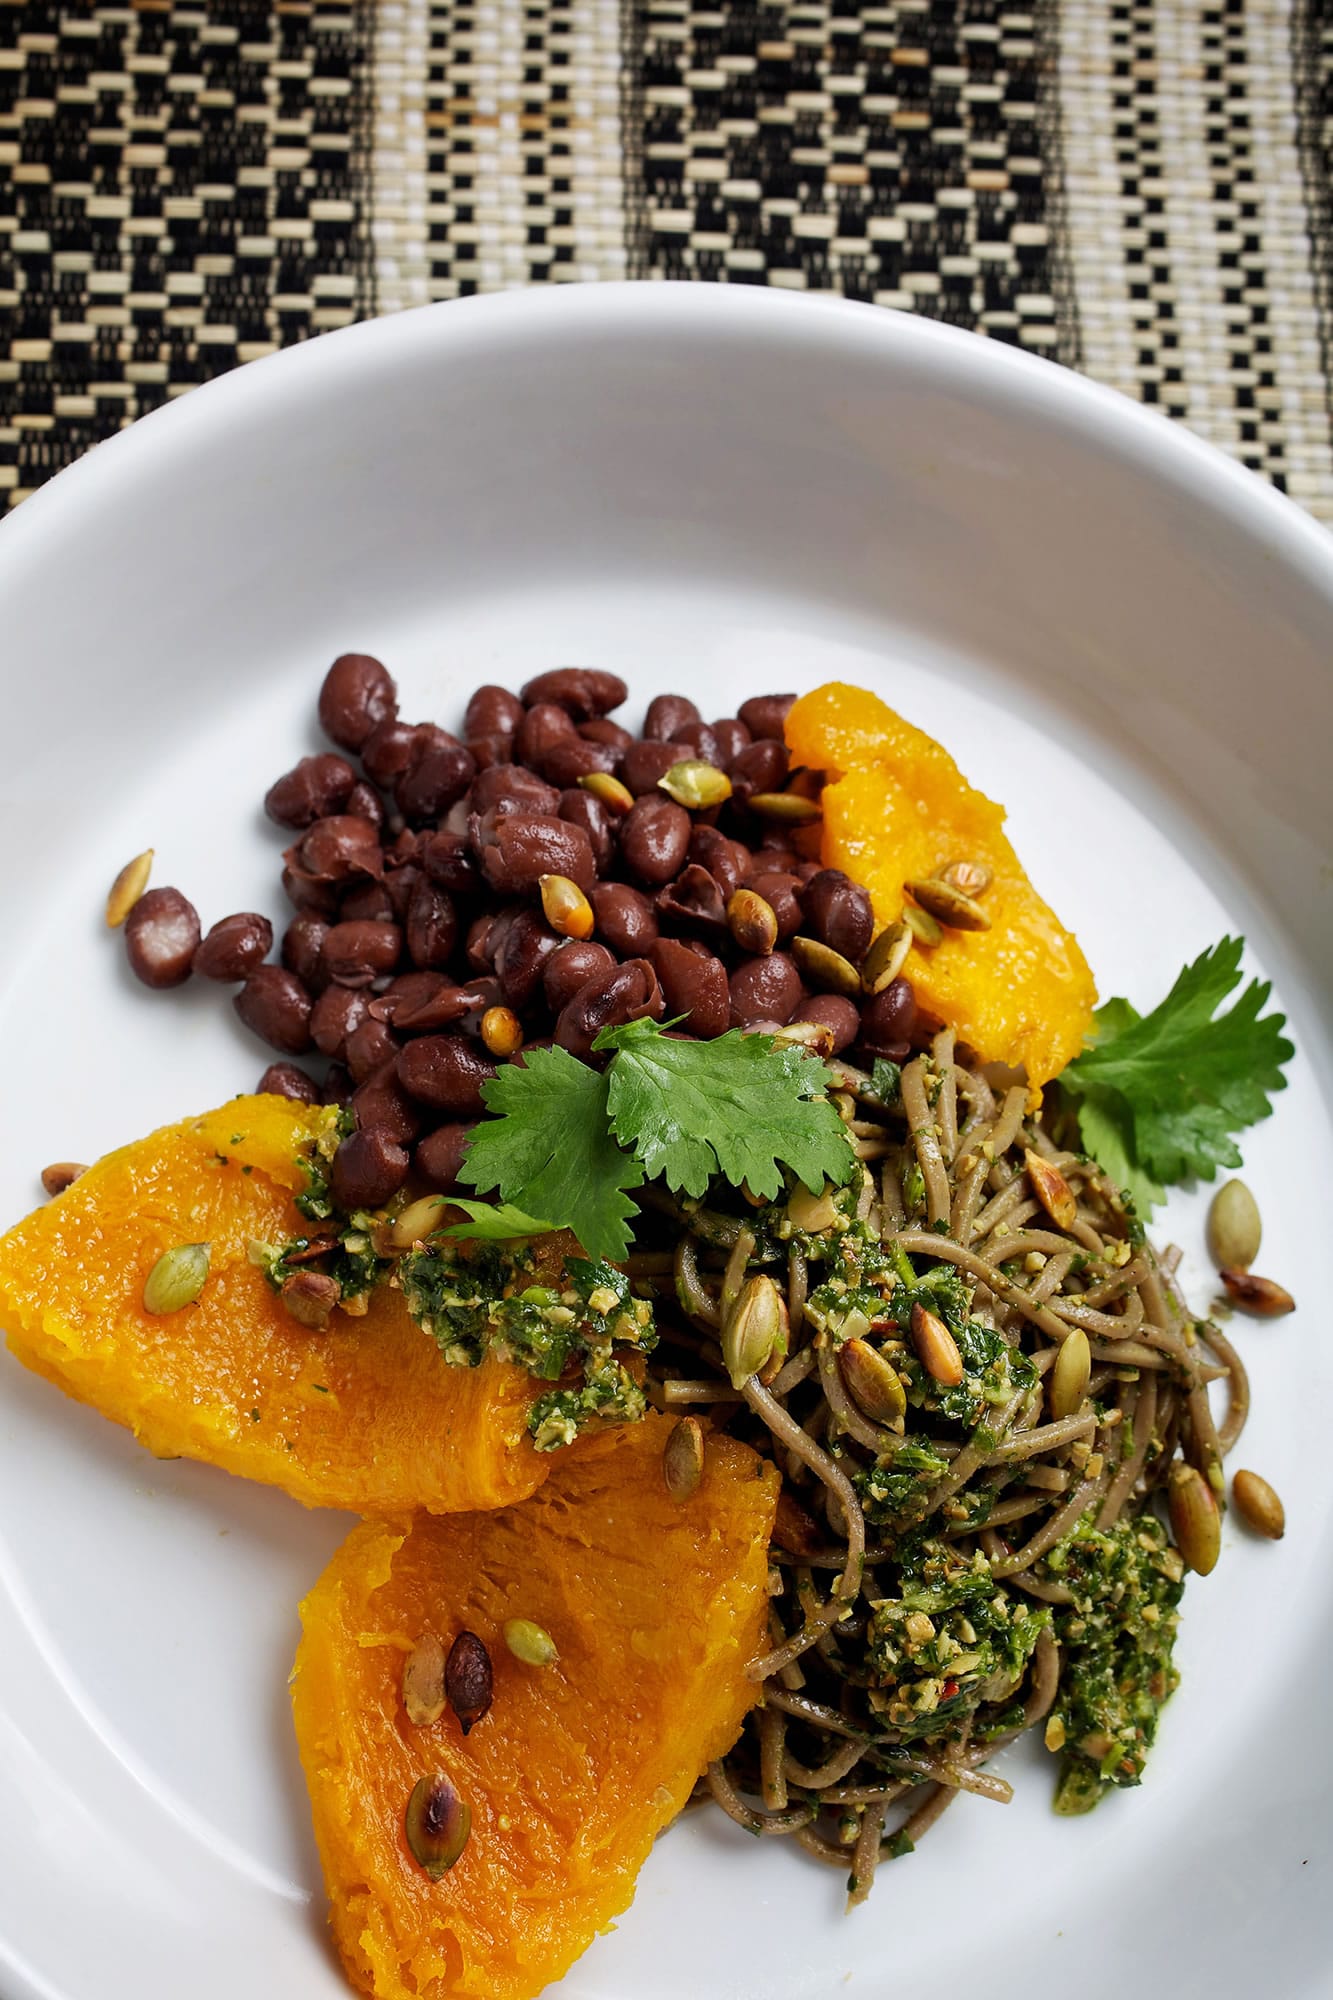 For a seasonal vegetable dish, you can't do better than fall pumpkin combined with tart chimichurri  and black beans in a bowl.